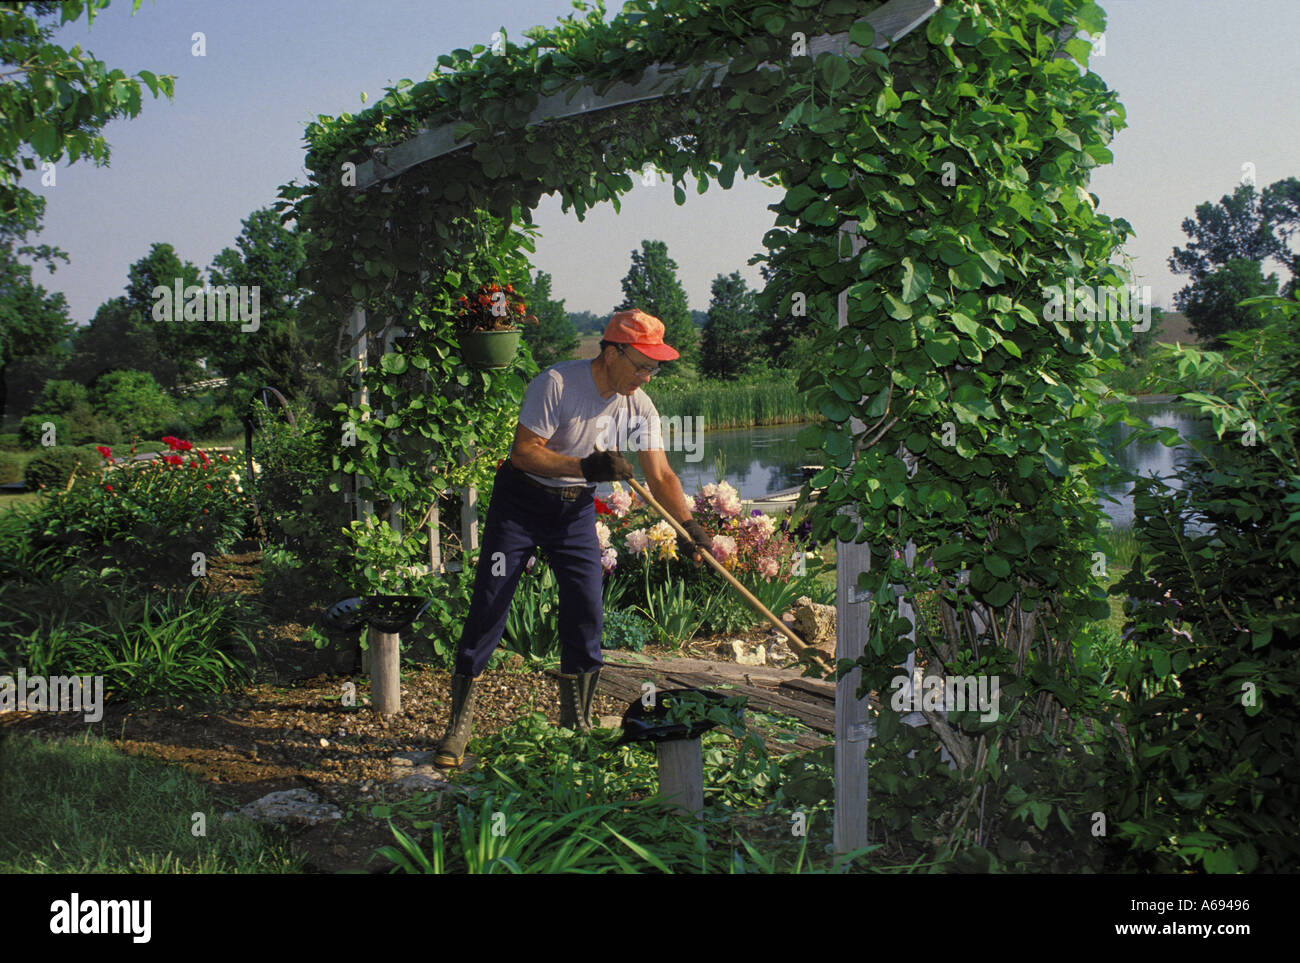 Man working with rake and gardening under a large arbor in a public garden Midwest, Missouri USA Stock Photo